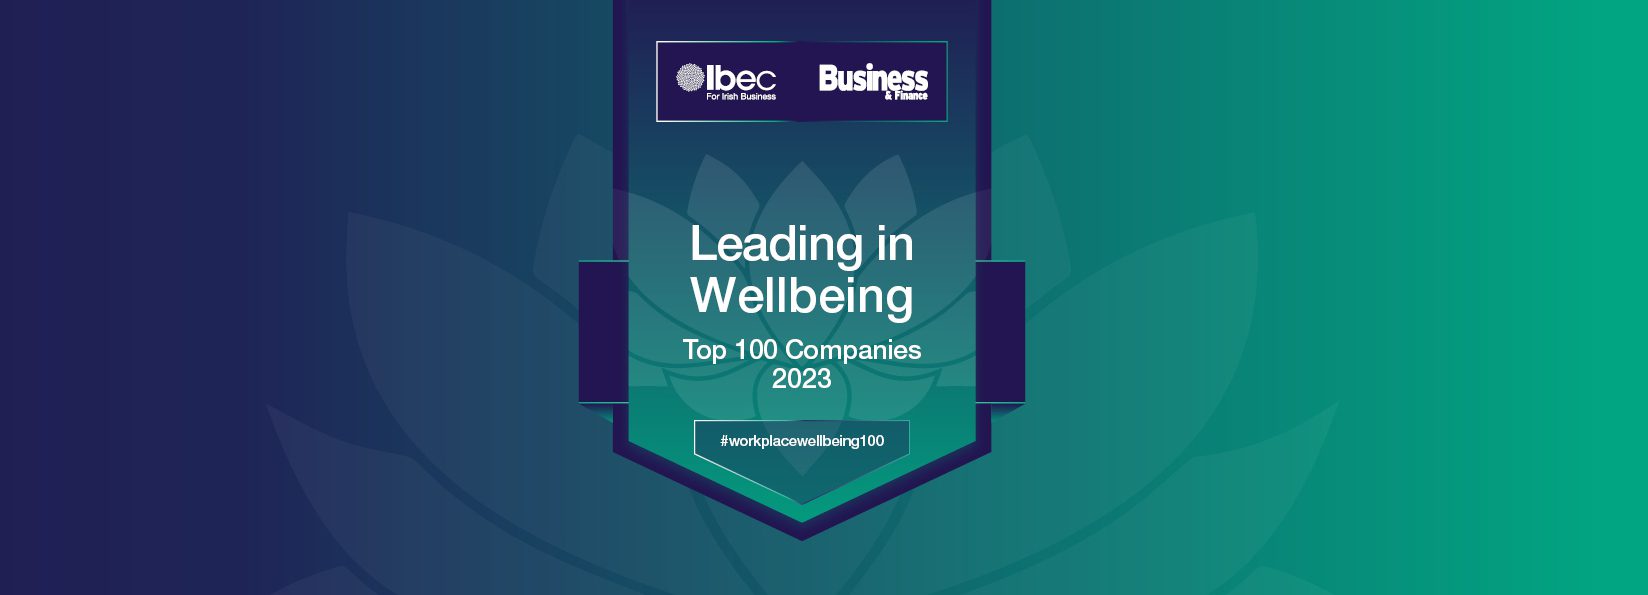 INSIGHT INTO ‘TOP 100 COMPANIES LEADING IN WELLBEING’ INDEX